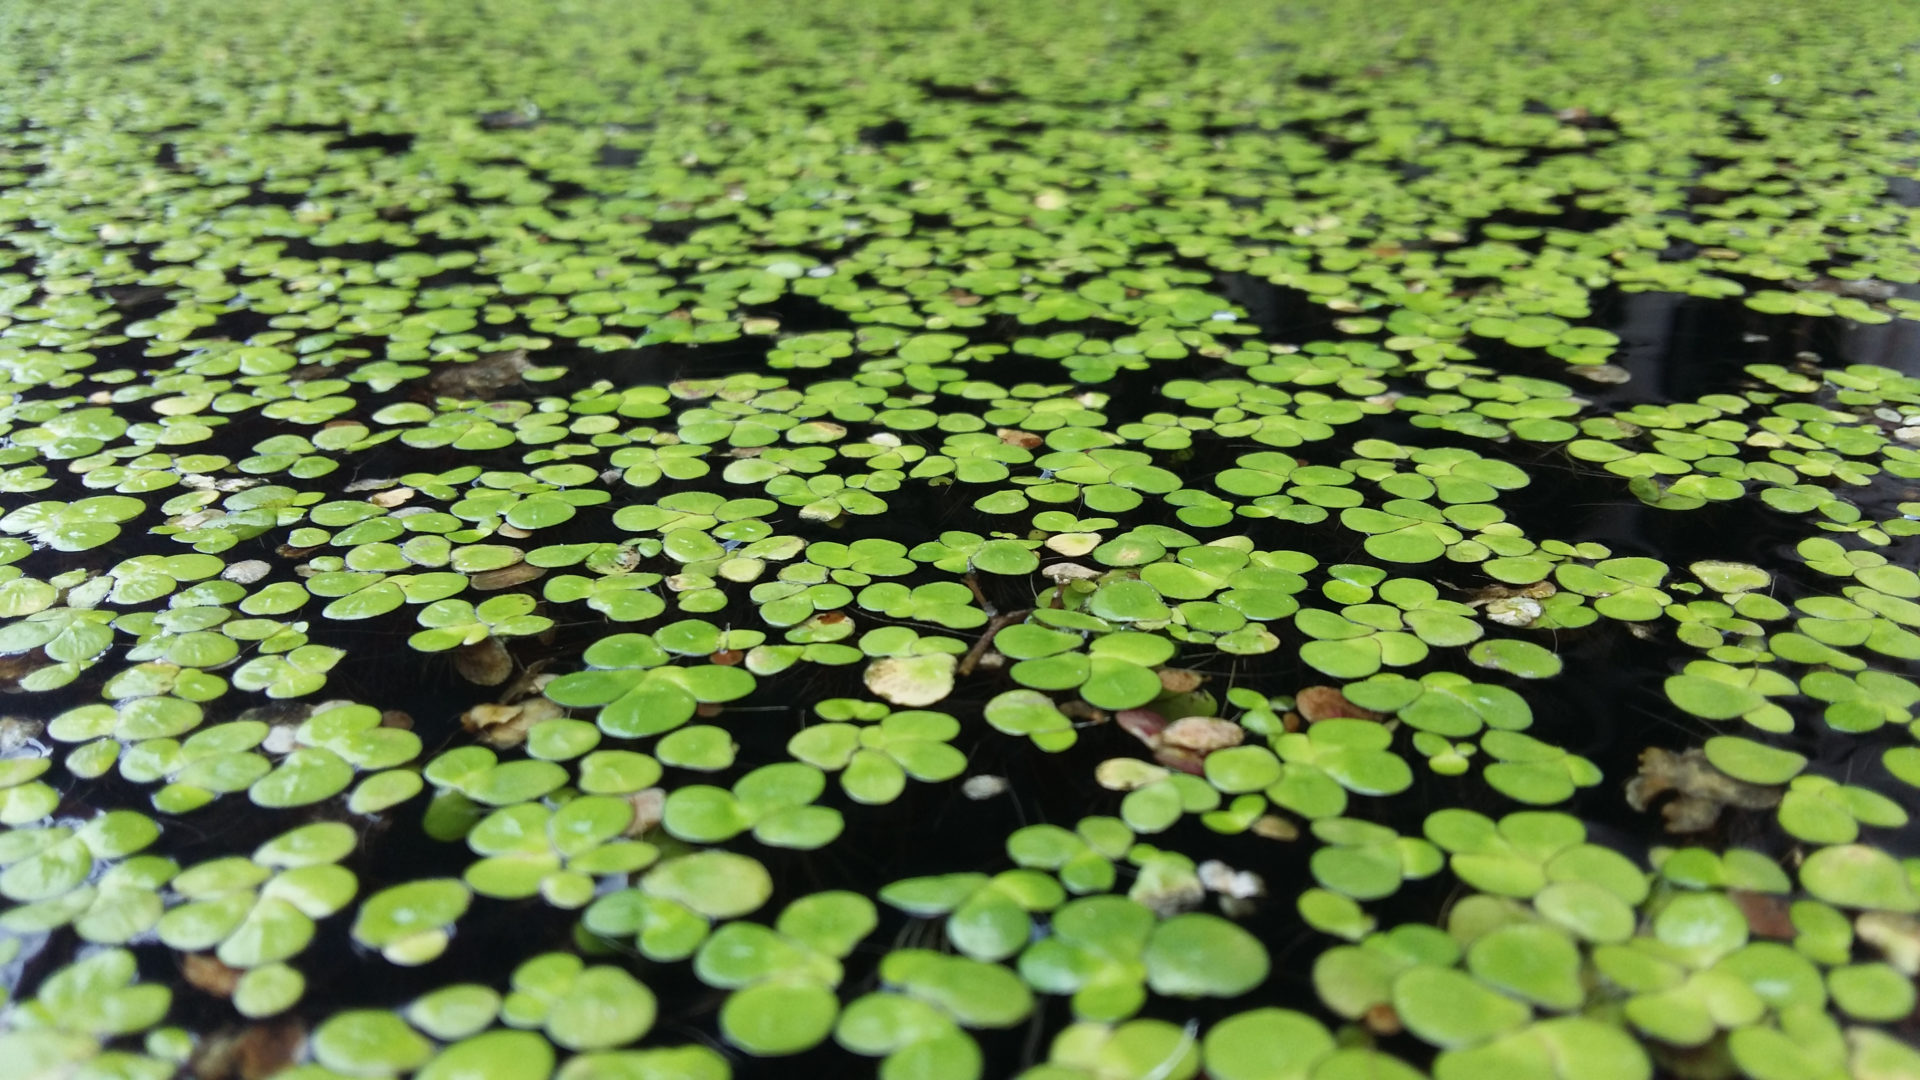 Increase in Veganism Propels Demand For Duckweed, One of World’s Most Sustainable & Nutritious Plants